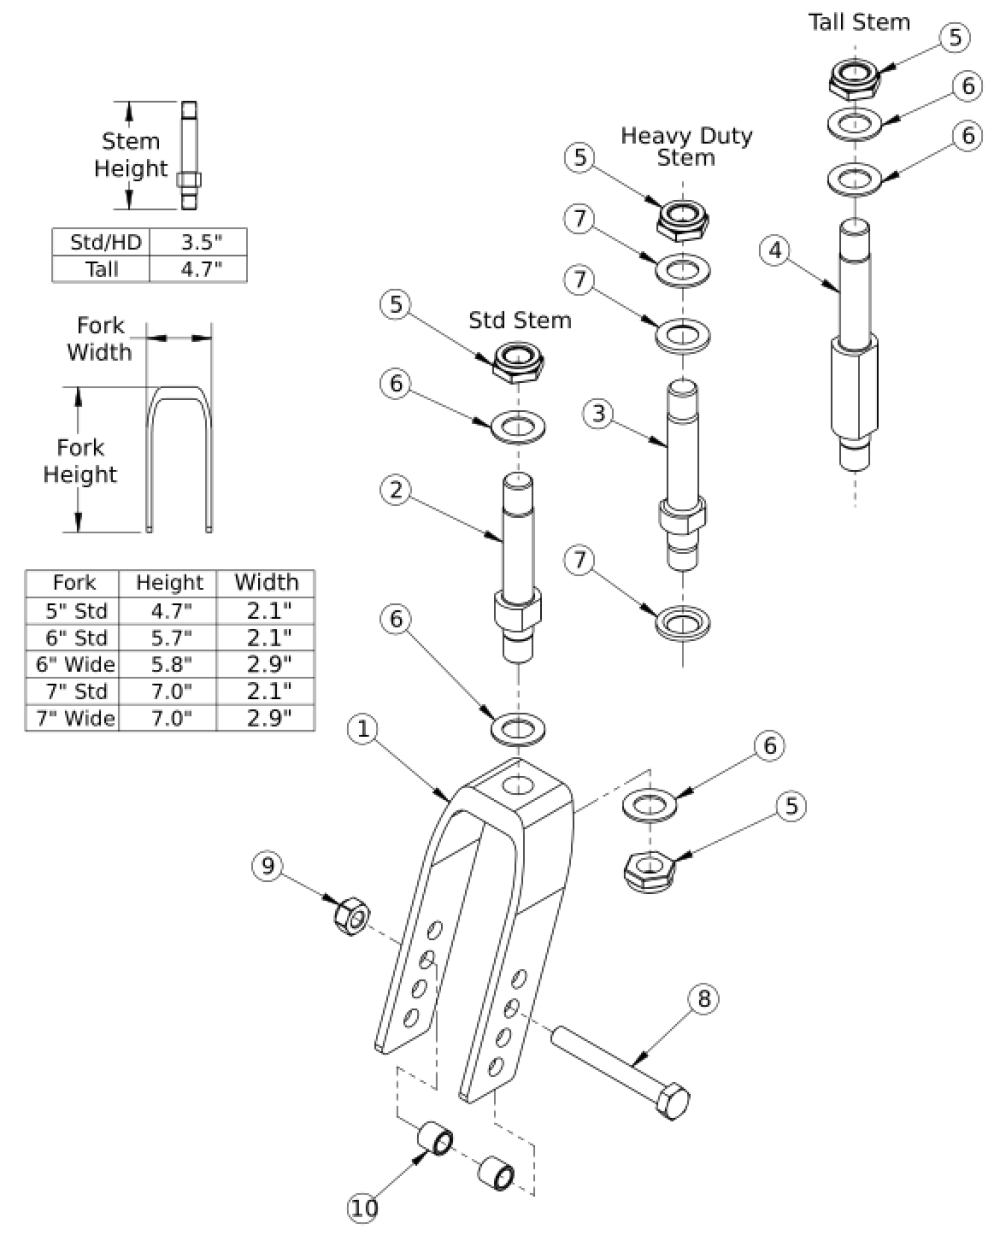 Discontinued Focus Cr Caster Forks And Stems parts diagram